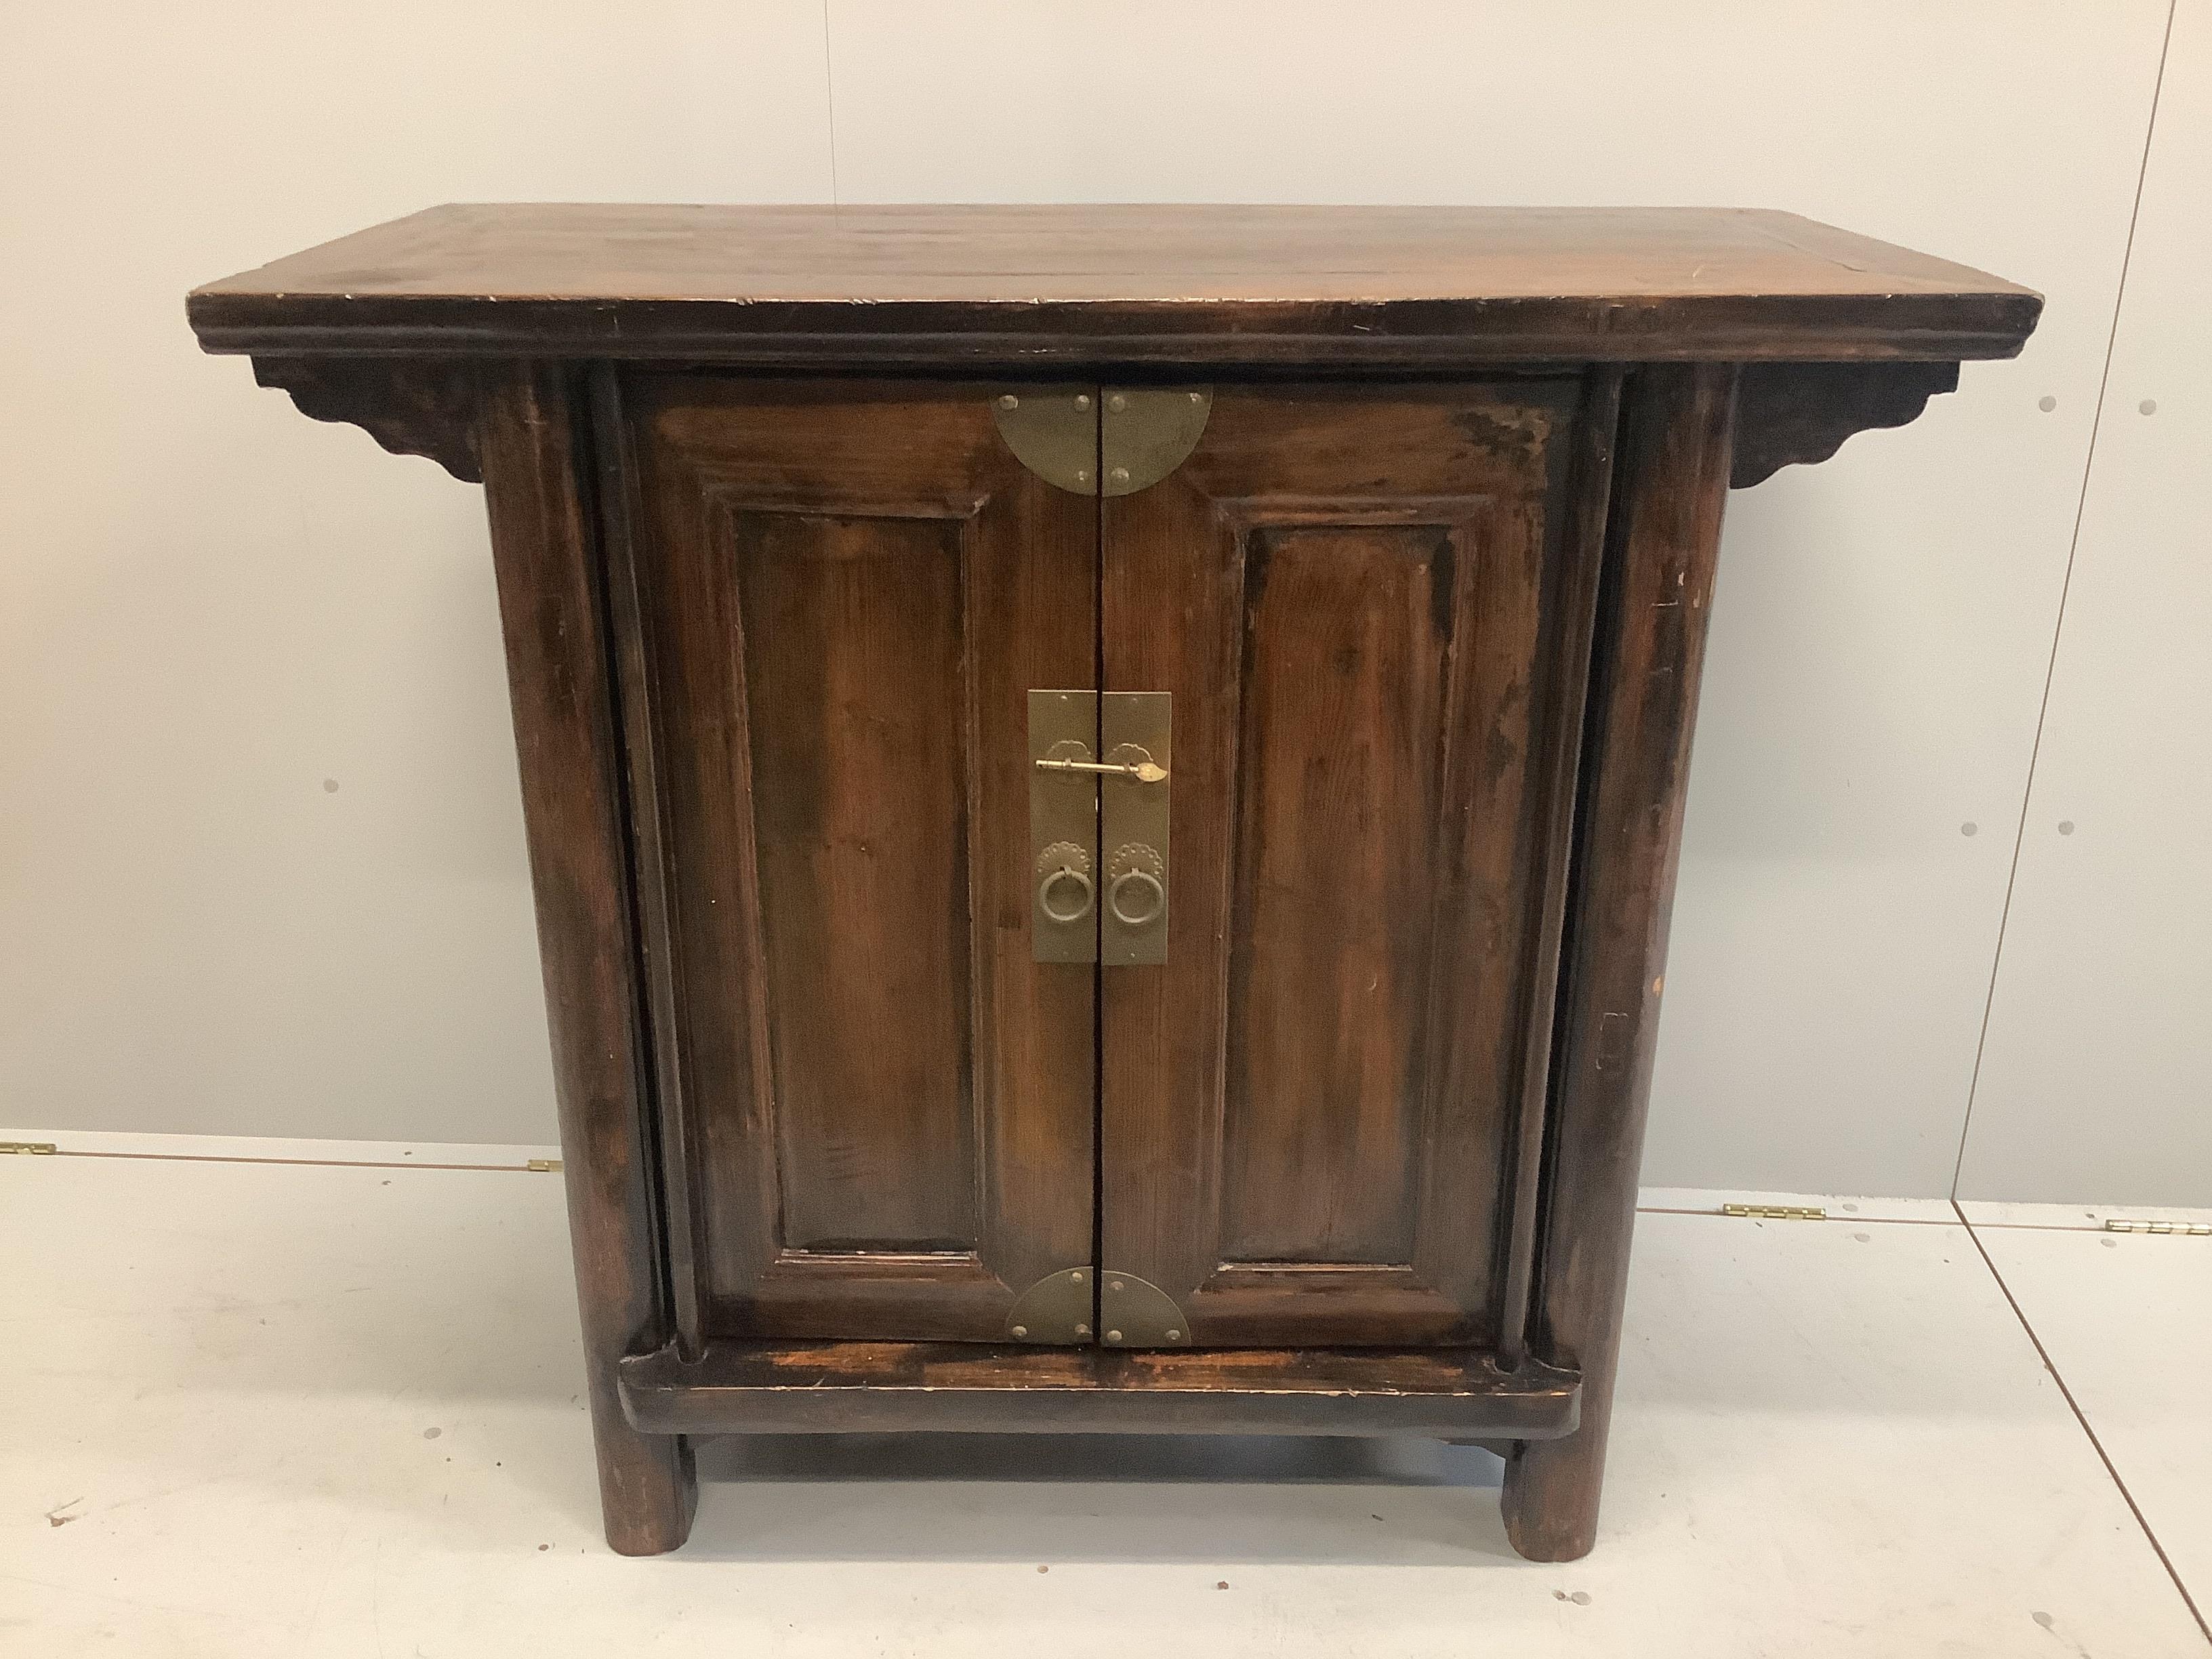 An India Jane Chinese pine two door side cabinet, width 120cm, depth 55cm, height 107cm